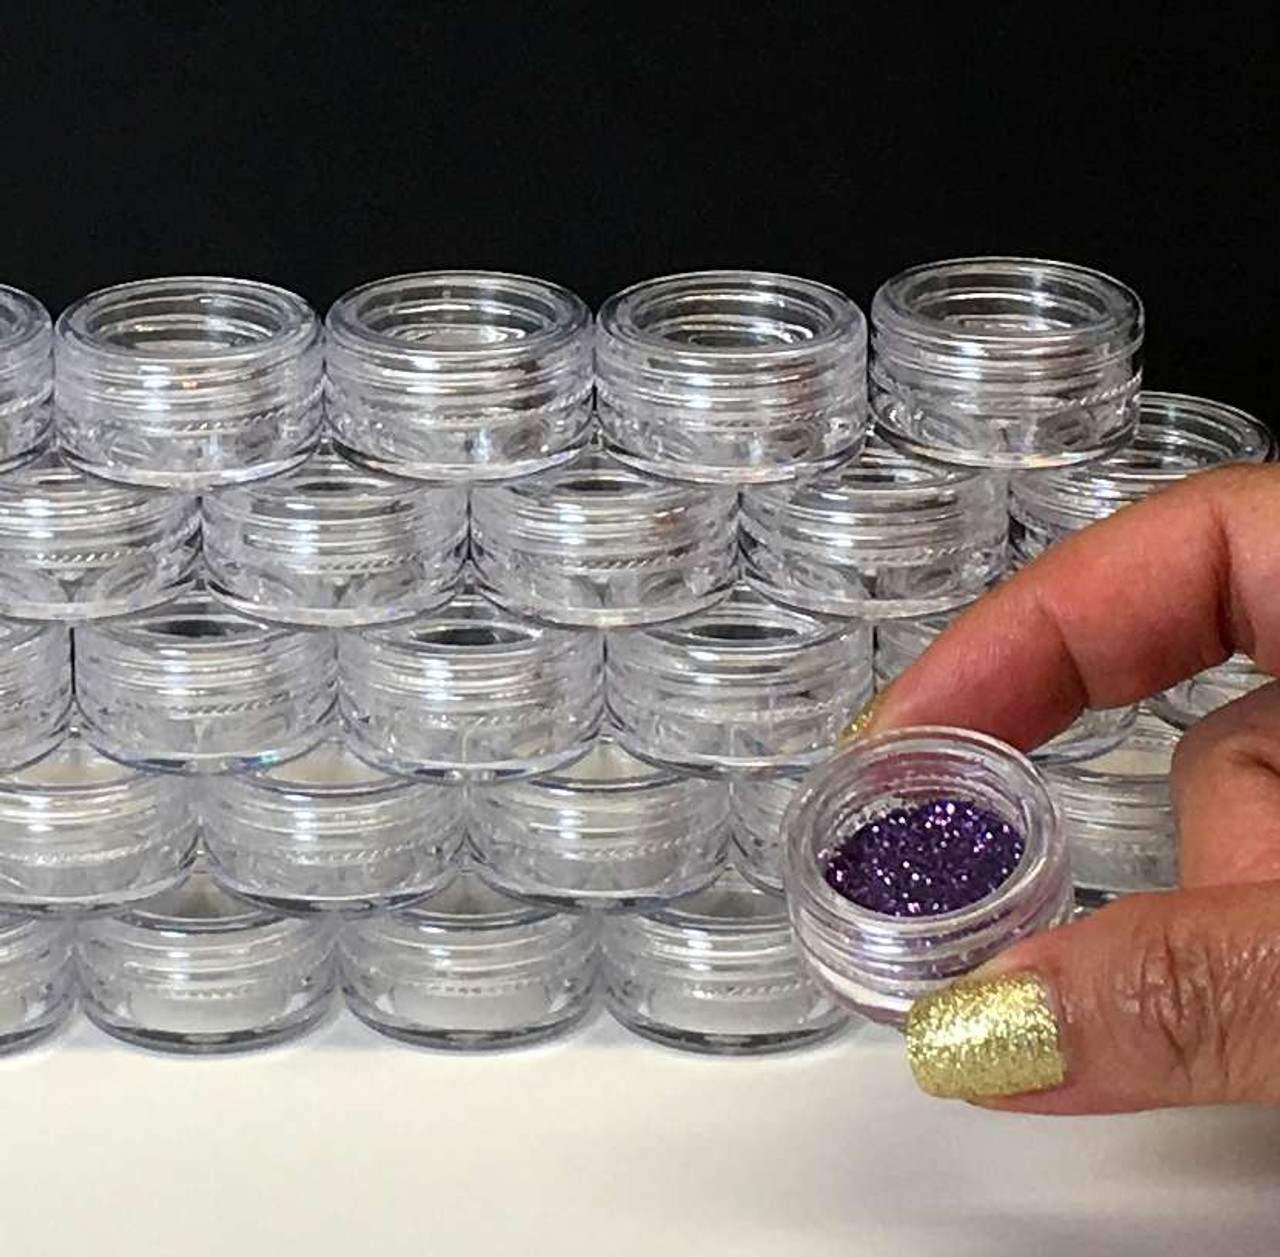 ZEJIA 3 Gram Sample Containers with Lids, 25 Count Tiny Sample Jars, 3ML  Makeup Cosmetic Containers for Lip Balms, Lotion, Powder, Beauty